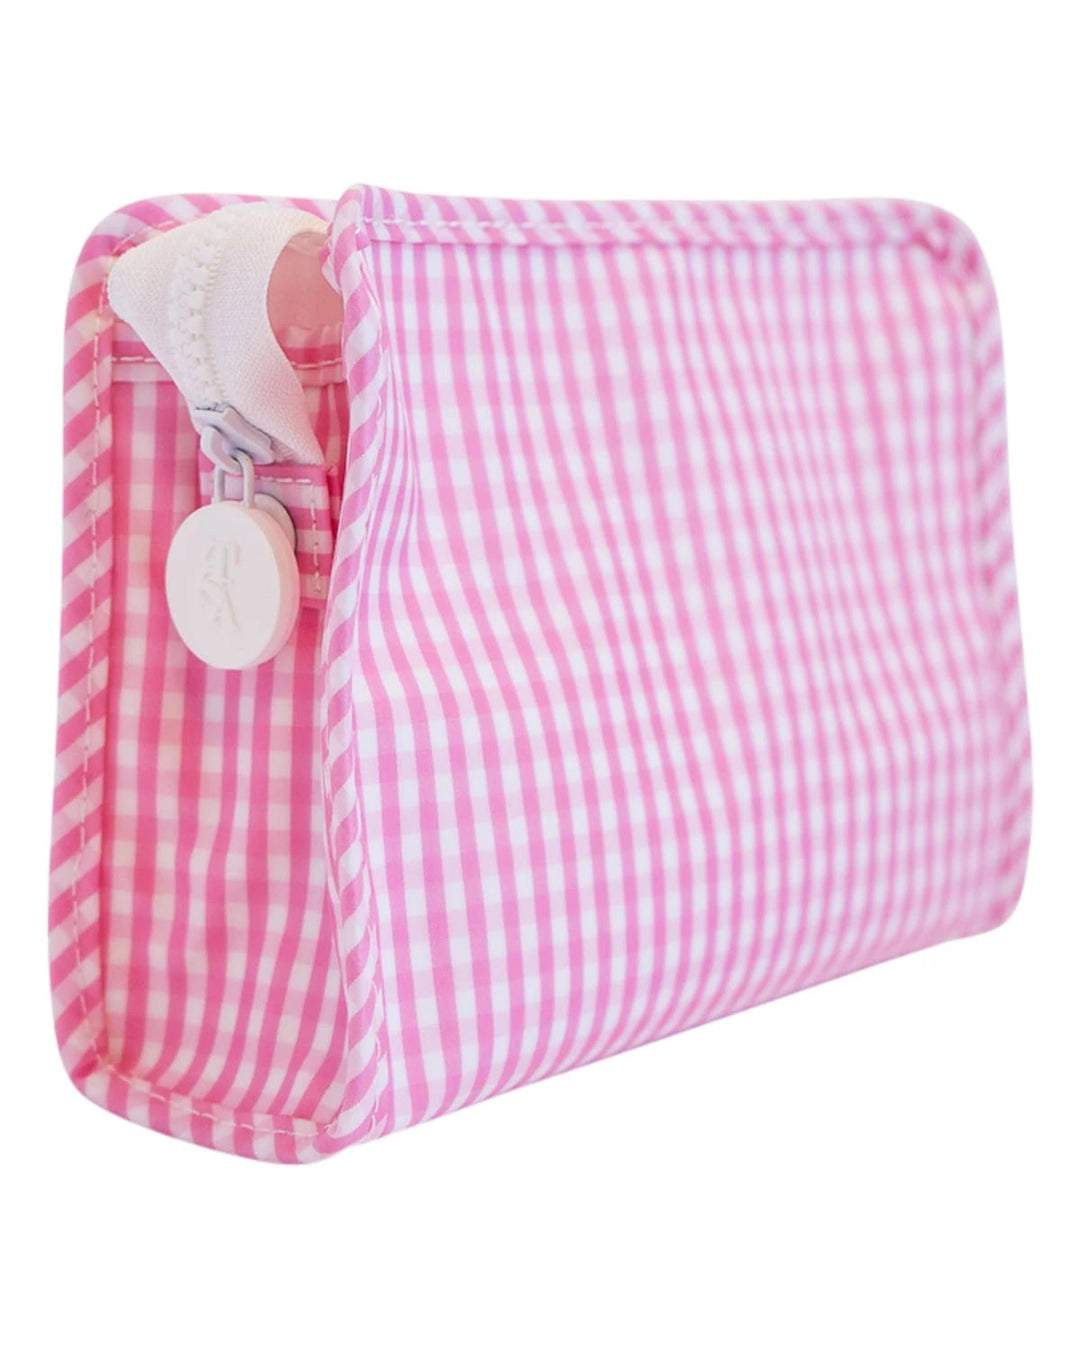 TRVL Design - Roadie Small Pouch - Pink Gingham